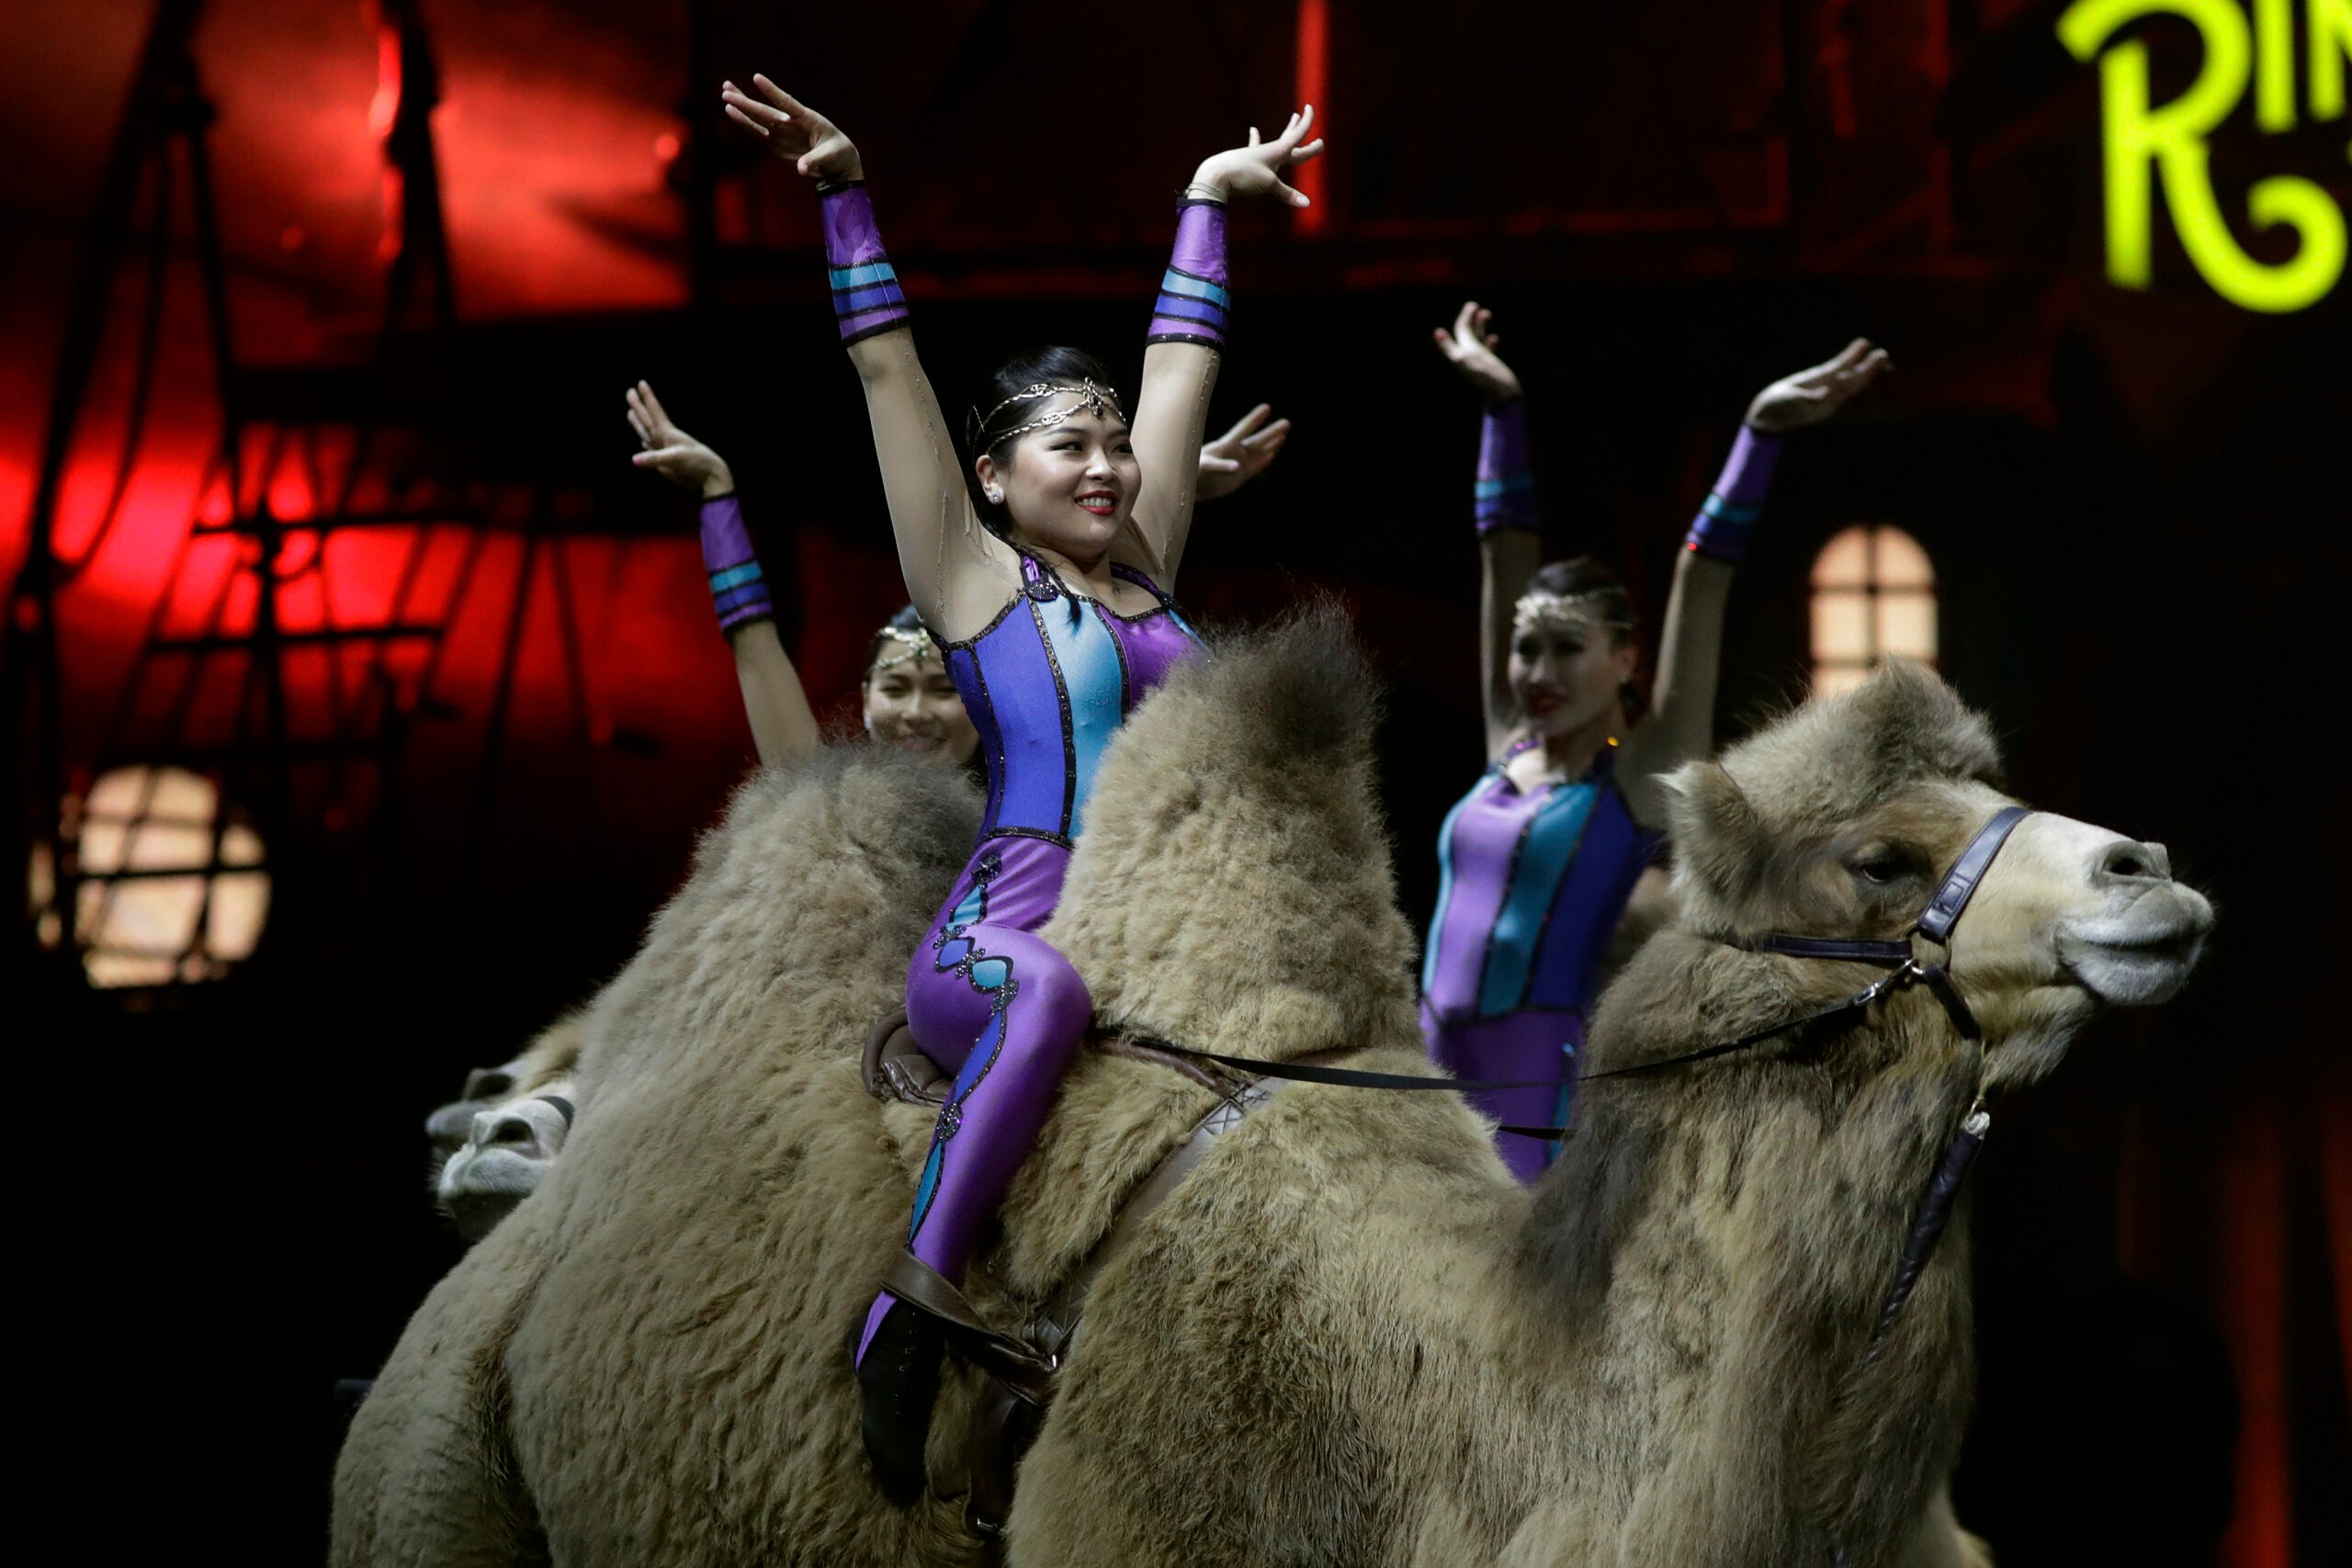 The big top comes down: Ringling Bros. circus is closing